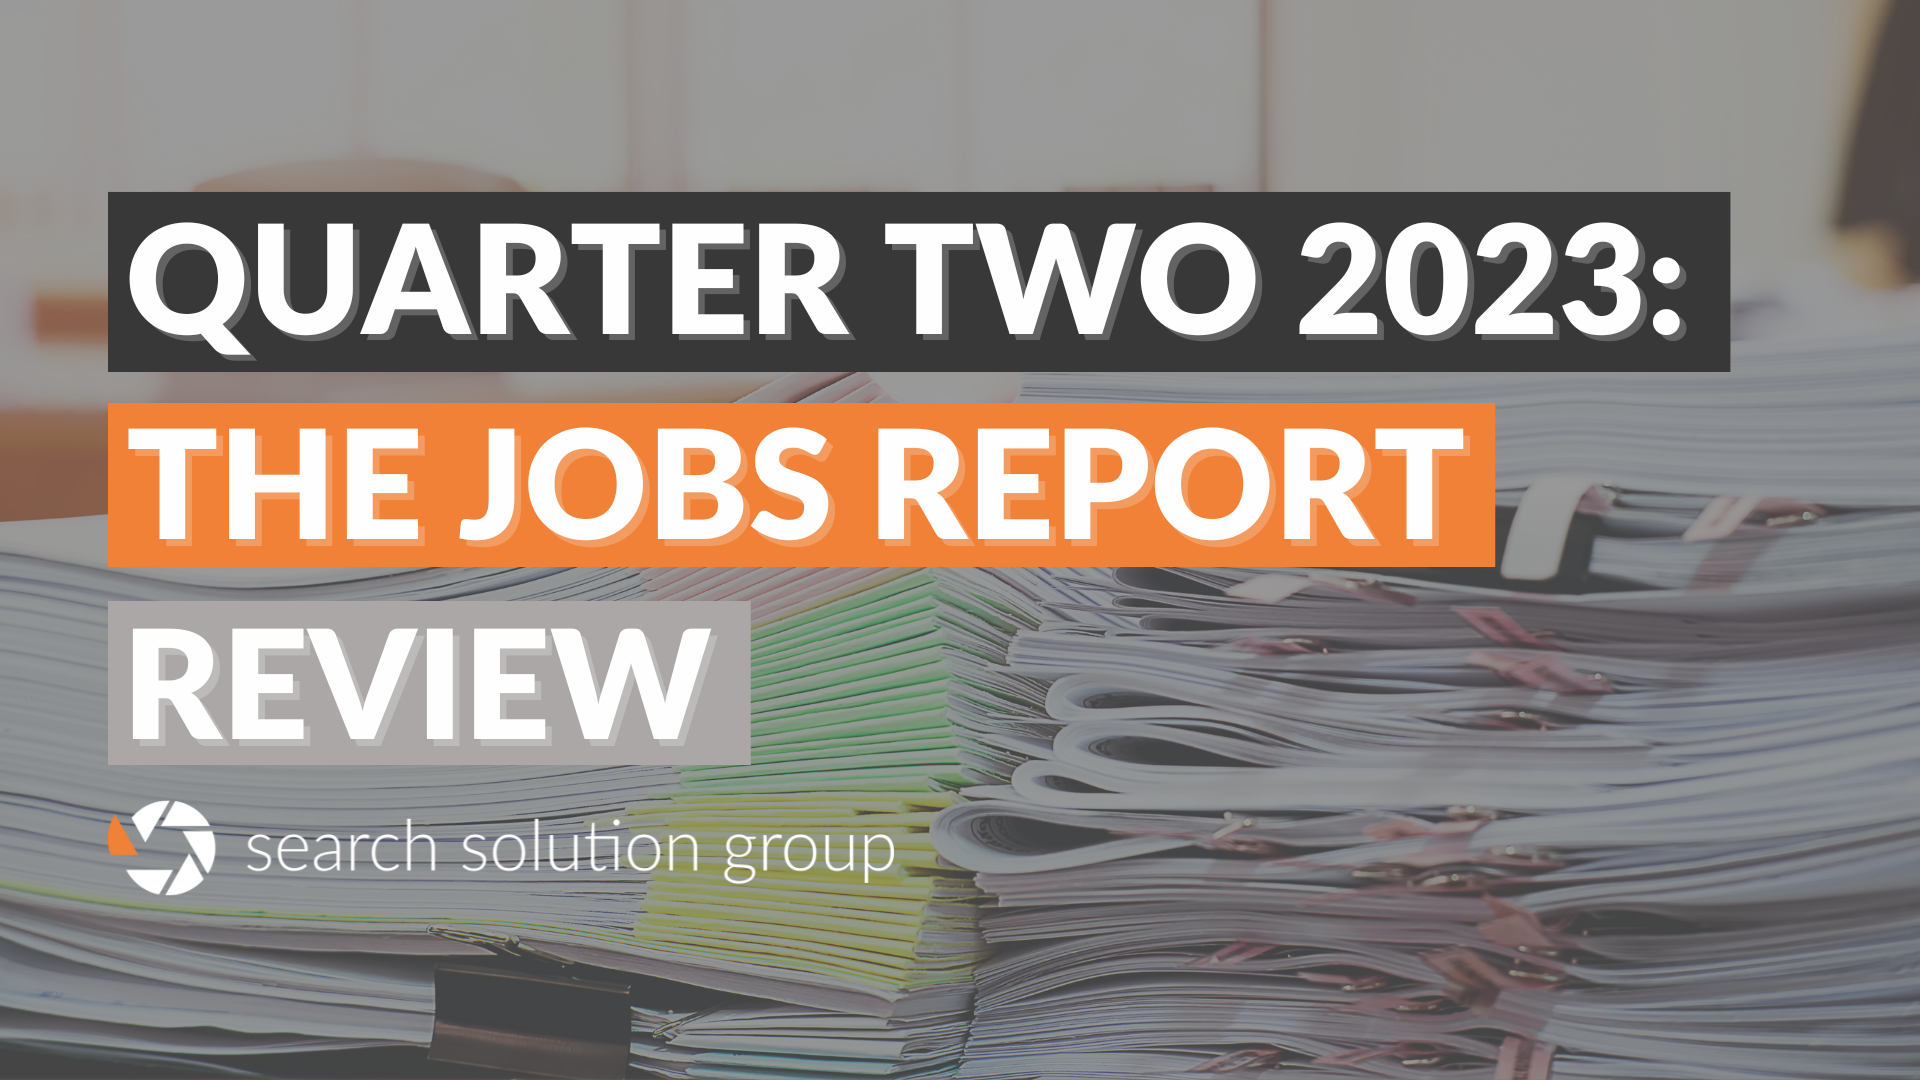 Quarter Two 2023: The Jobs Report Review